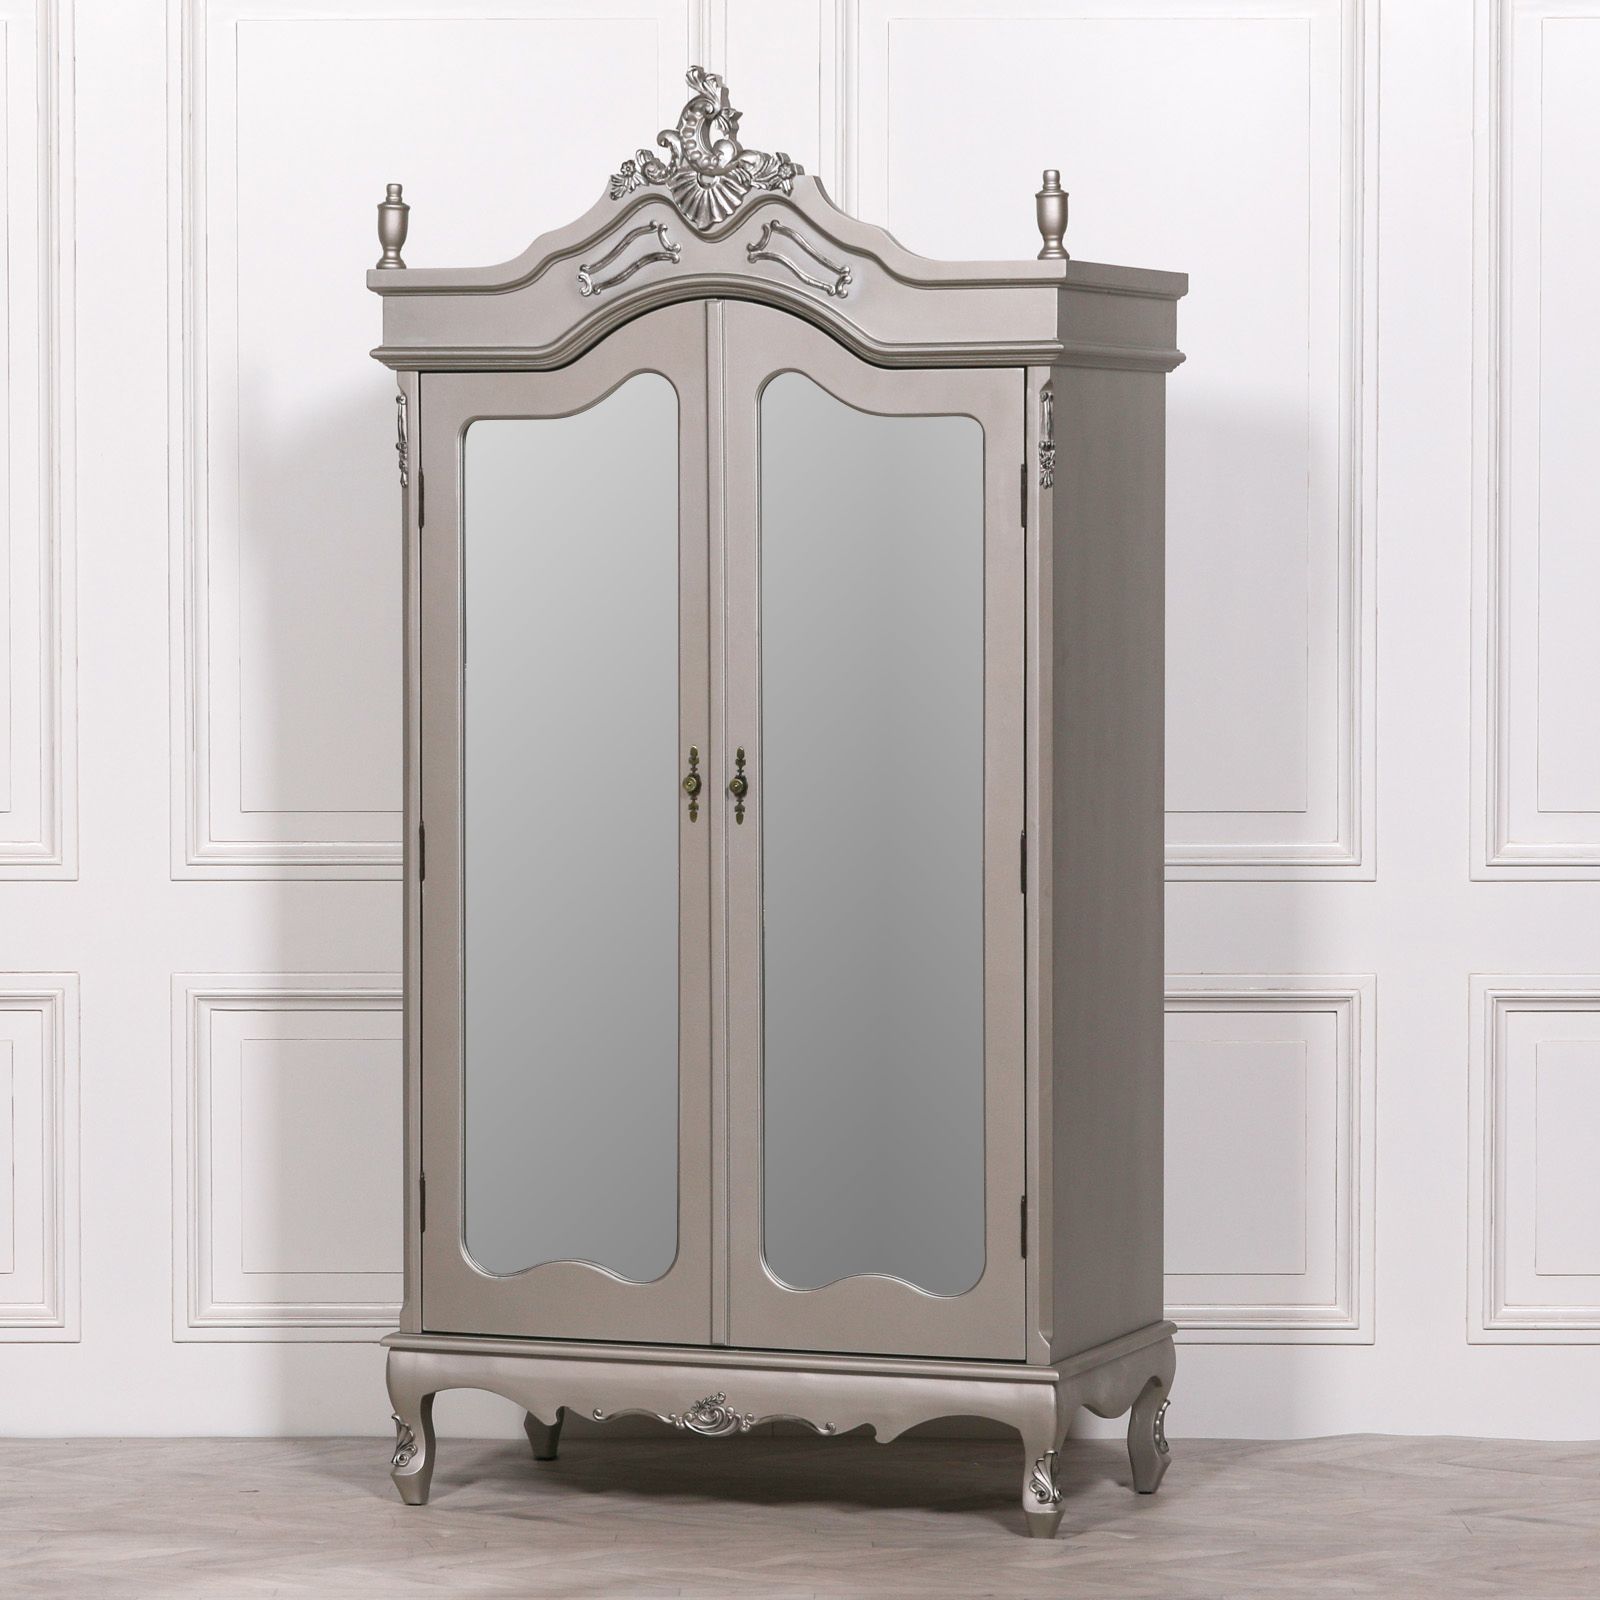 French Style Double Armoire Silver Wardrobe Mirrored Doors Within French Armoire Wardrobes (Gallery 17 of 20)